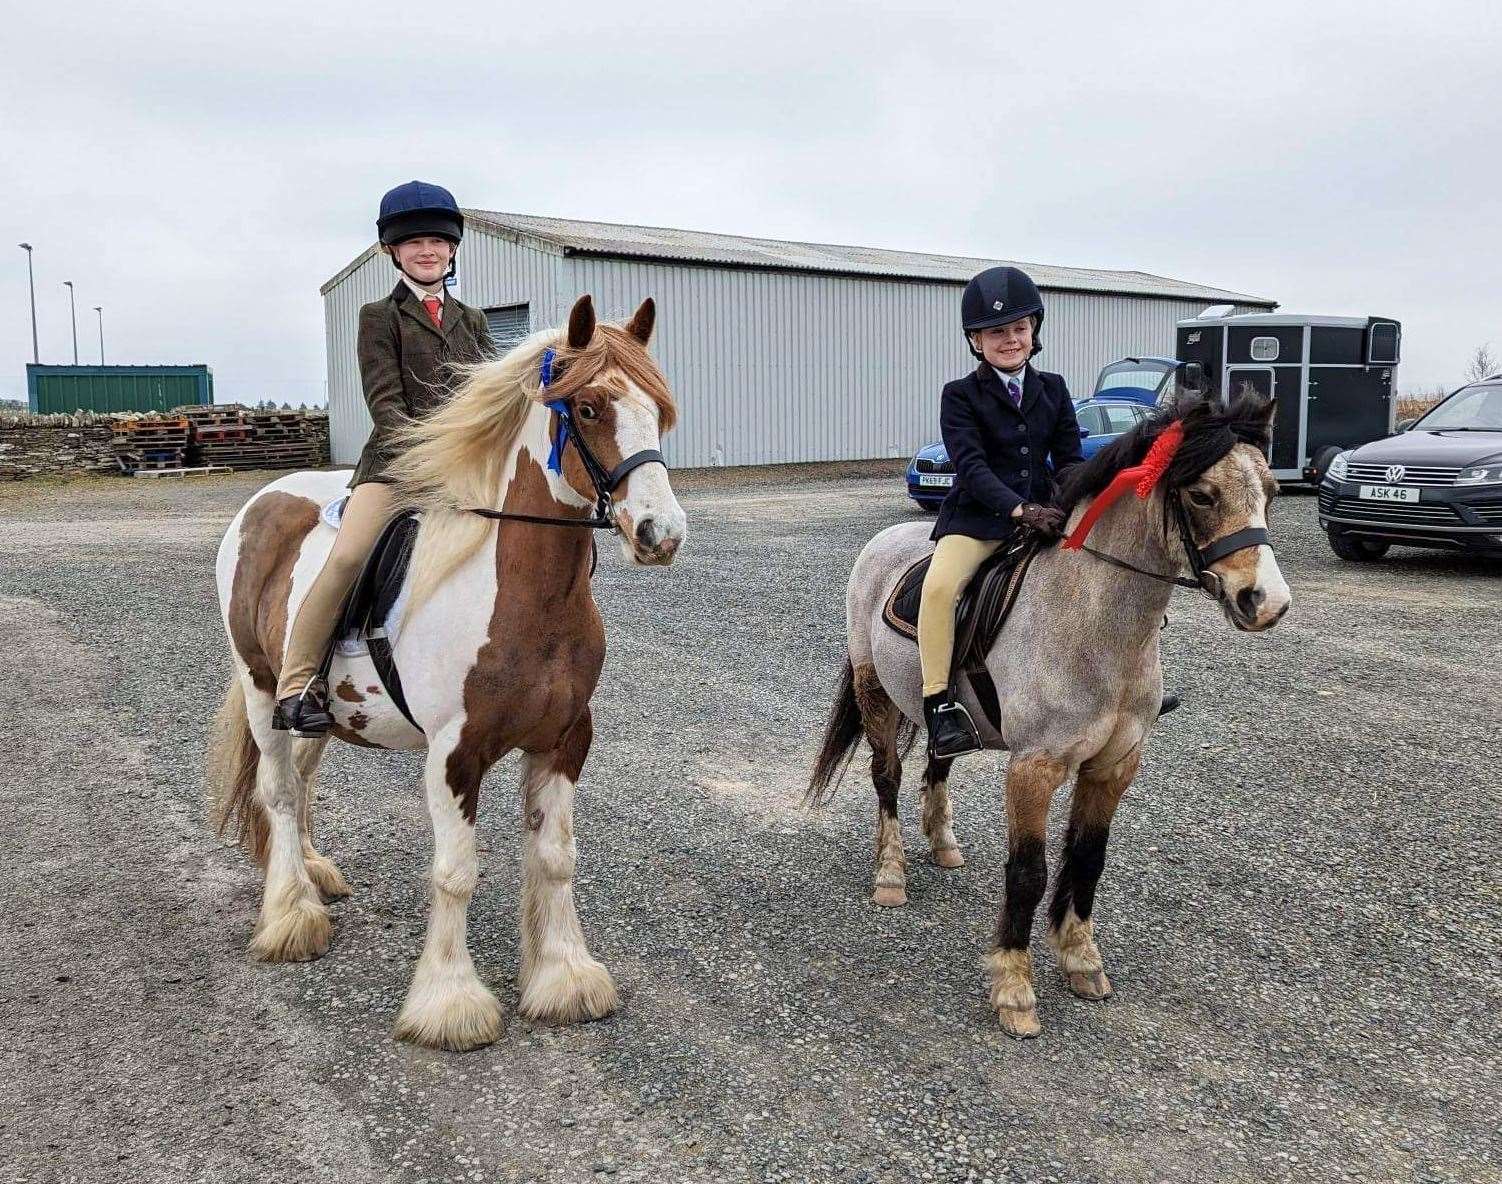 Caysie Sinclair and Zara (left), winners of the junior Into C test, along with Rachel MacGregor and Dandy, who won the Intro A junior section.